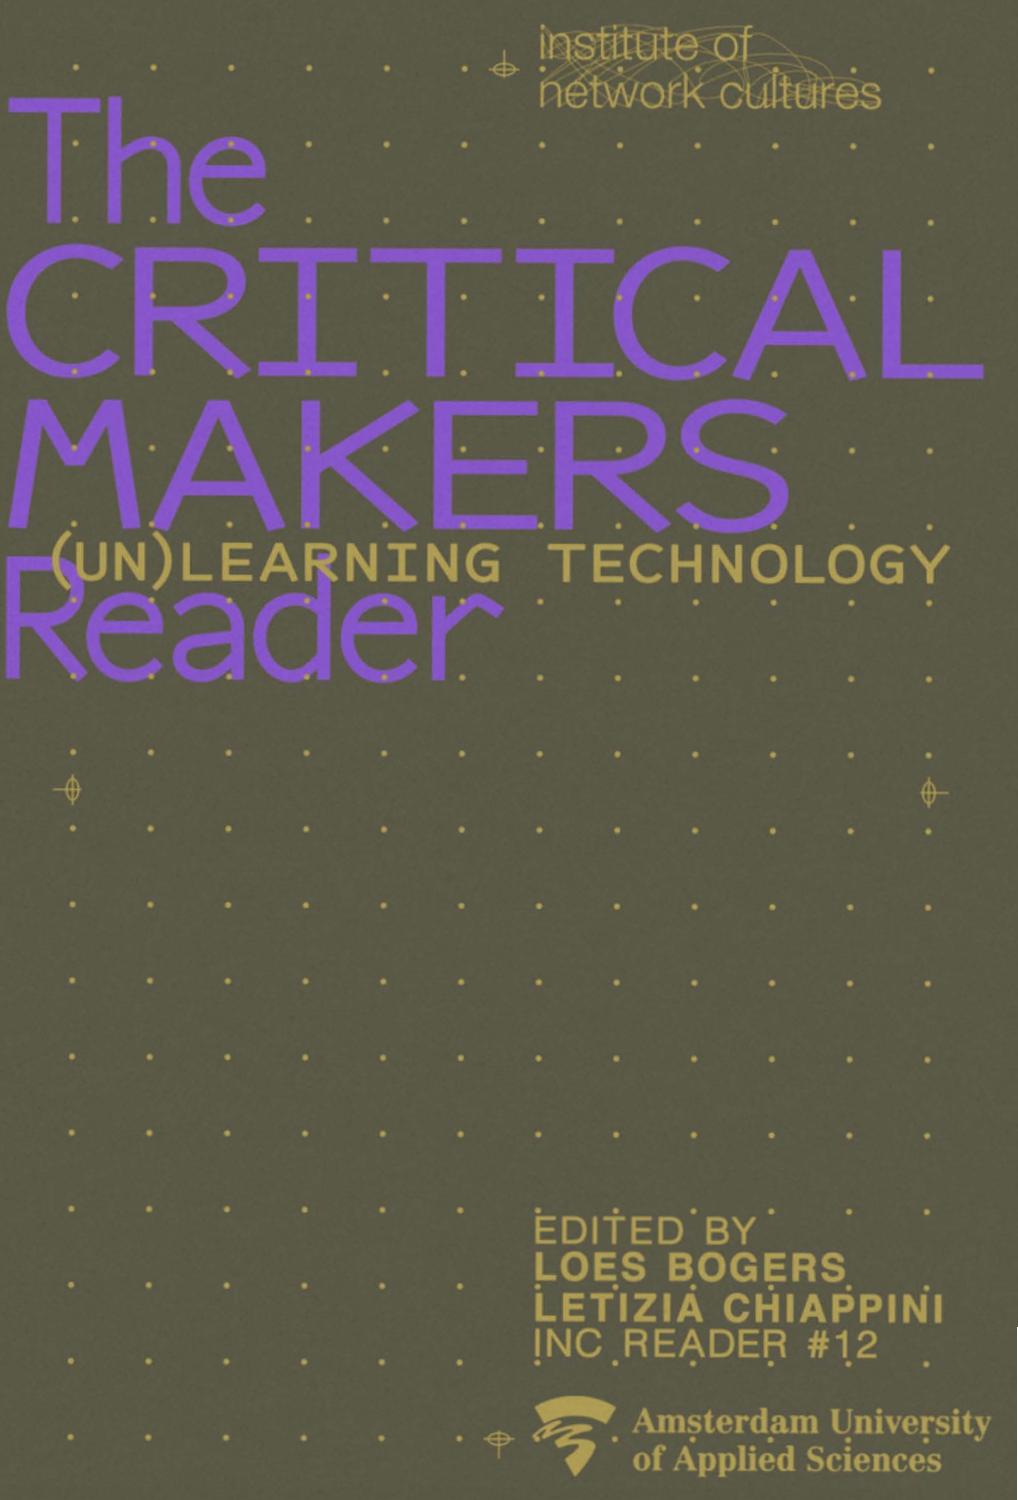 The Critical Makers Reader (Paperback, Institute of Network Cultures)